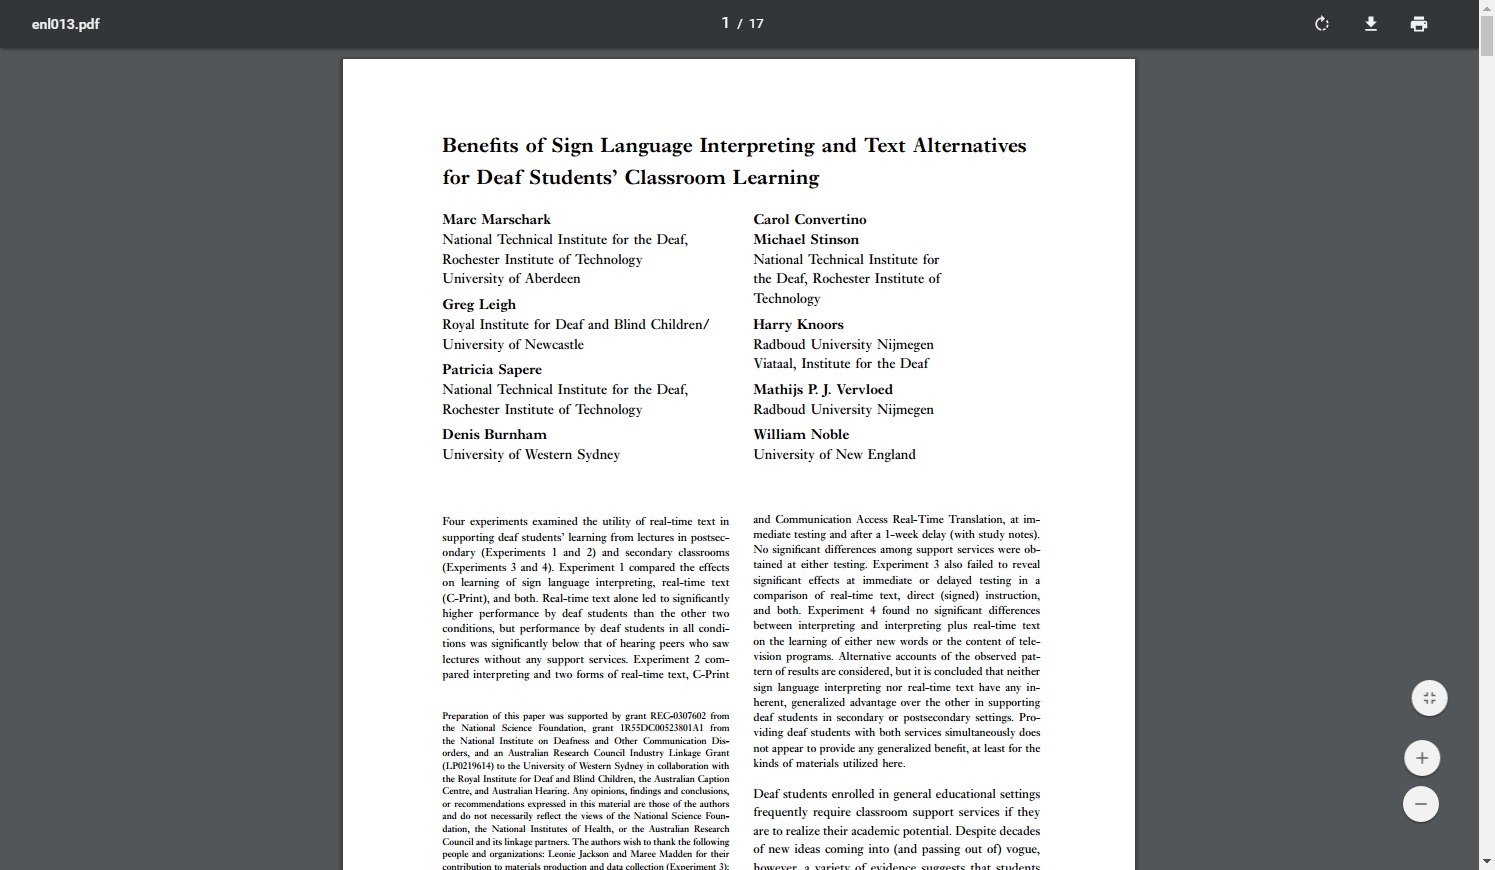 Image from: Benefits of Sign Language Interpreting and Text Alternatives for Deaf Students' Classroom Learning